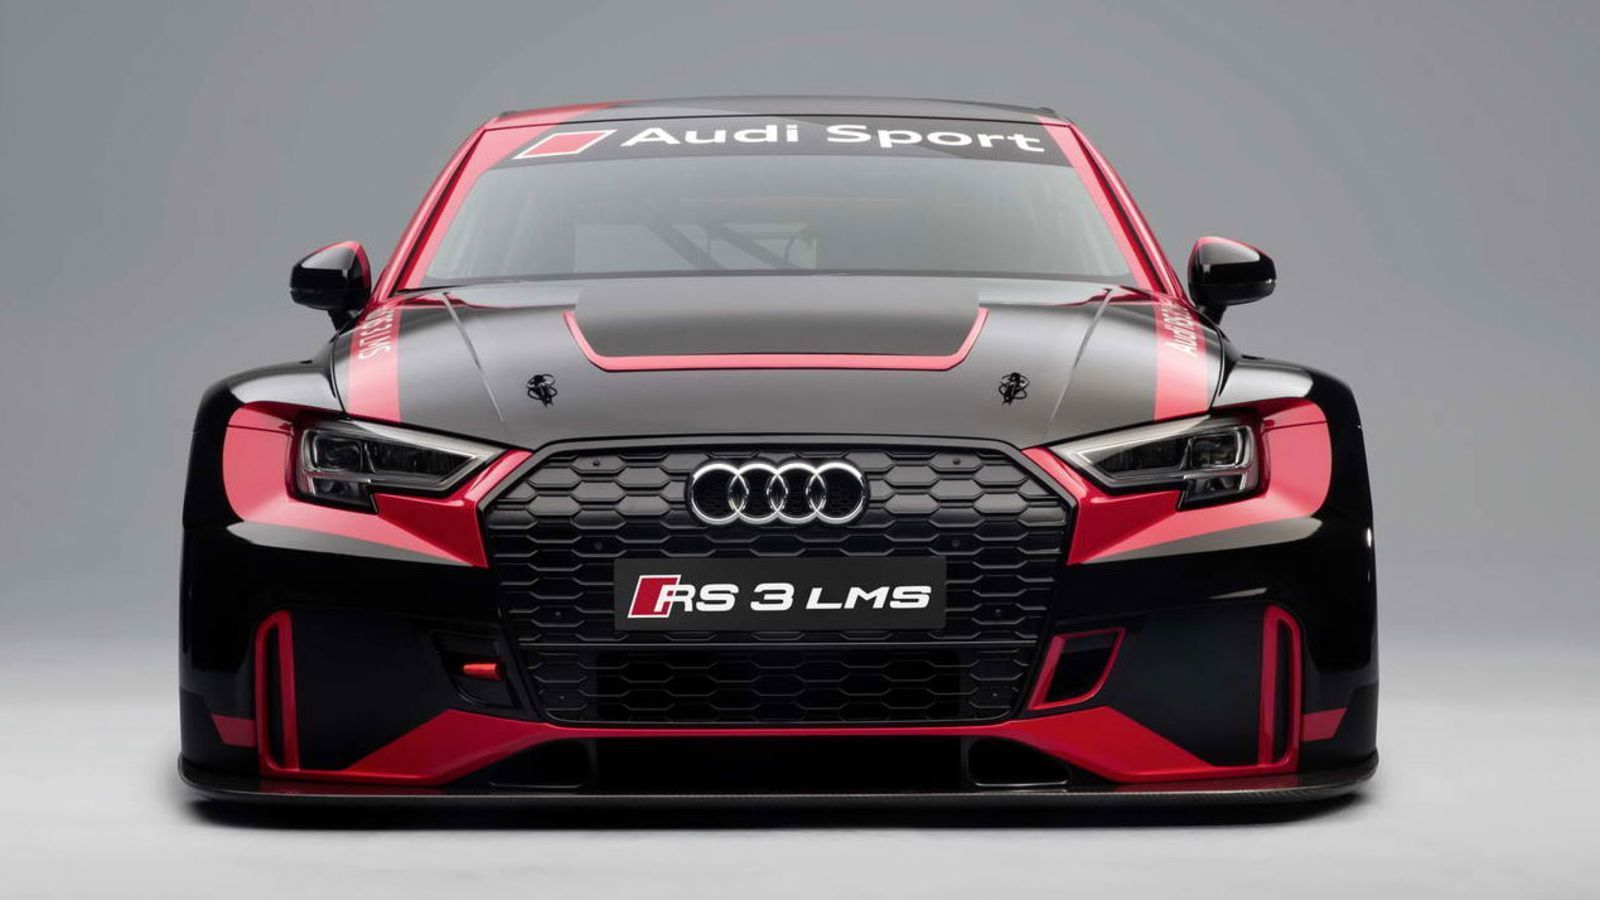 The Audi Rs3 Lms Is One Of Cheapest Ways To Get A Real S3 Logo 1600x900